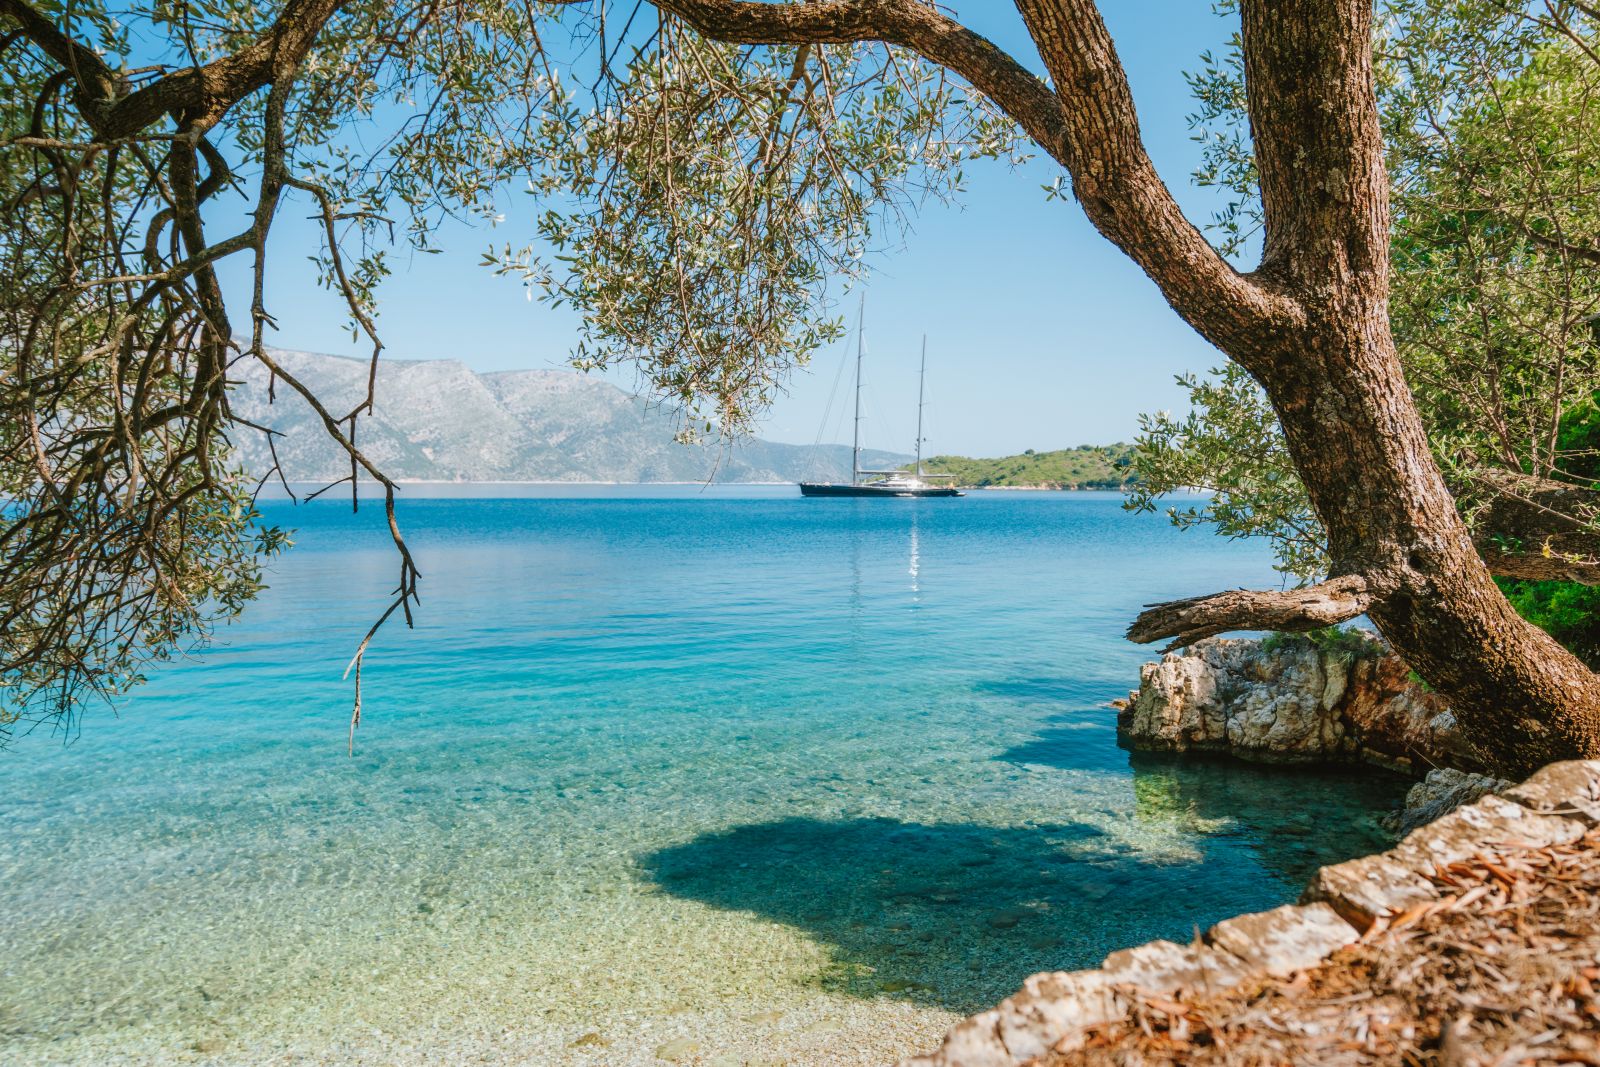 A gulet docking in a tranquil bay in the Greek Islands